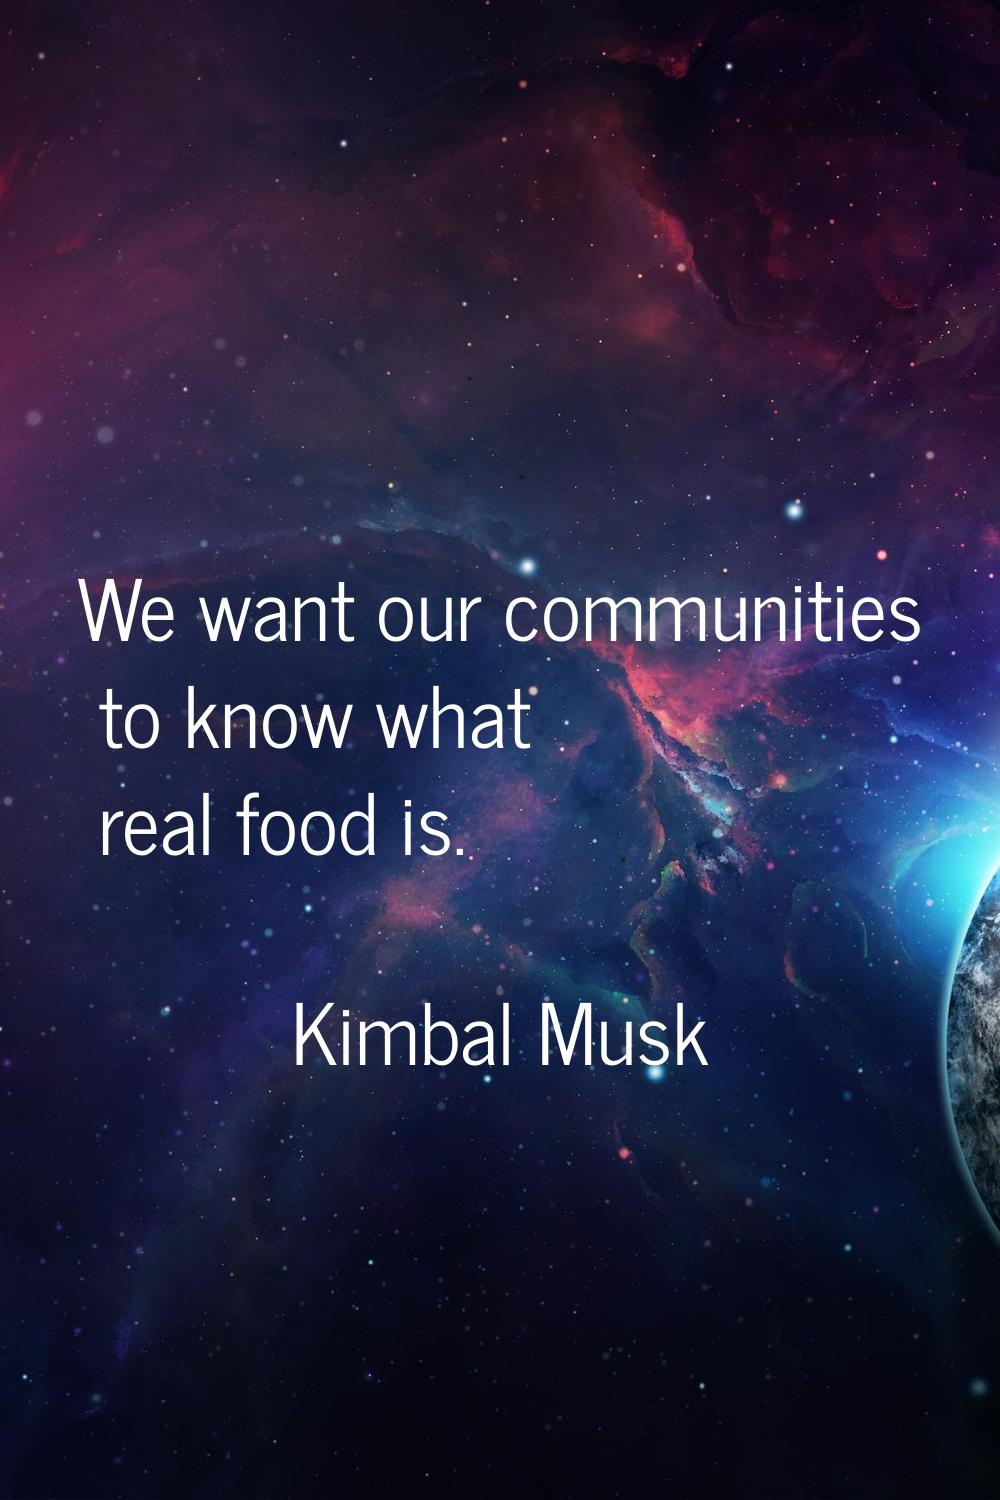 We want our communities to know what real food is.